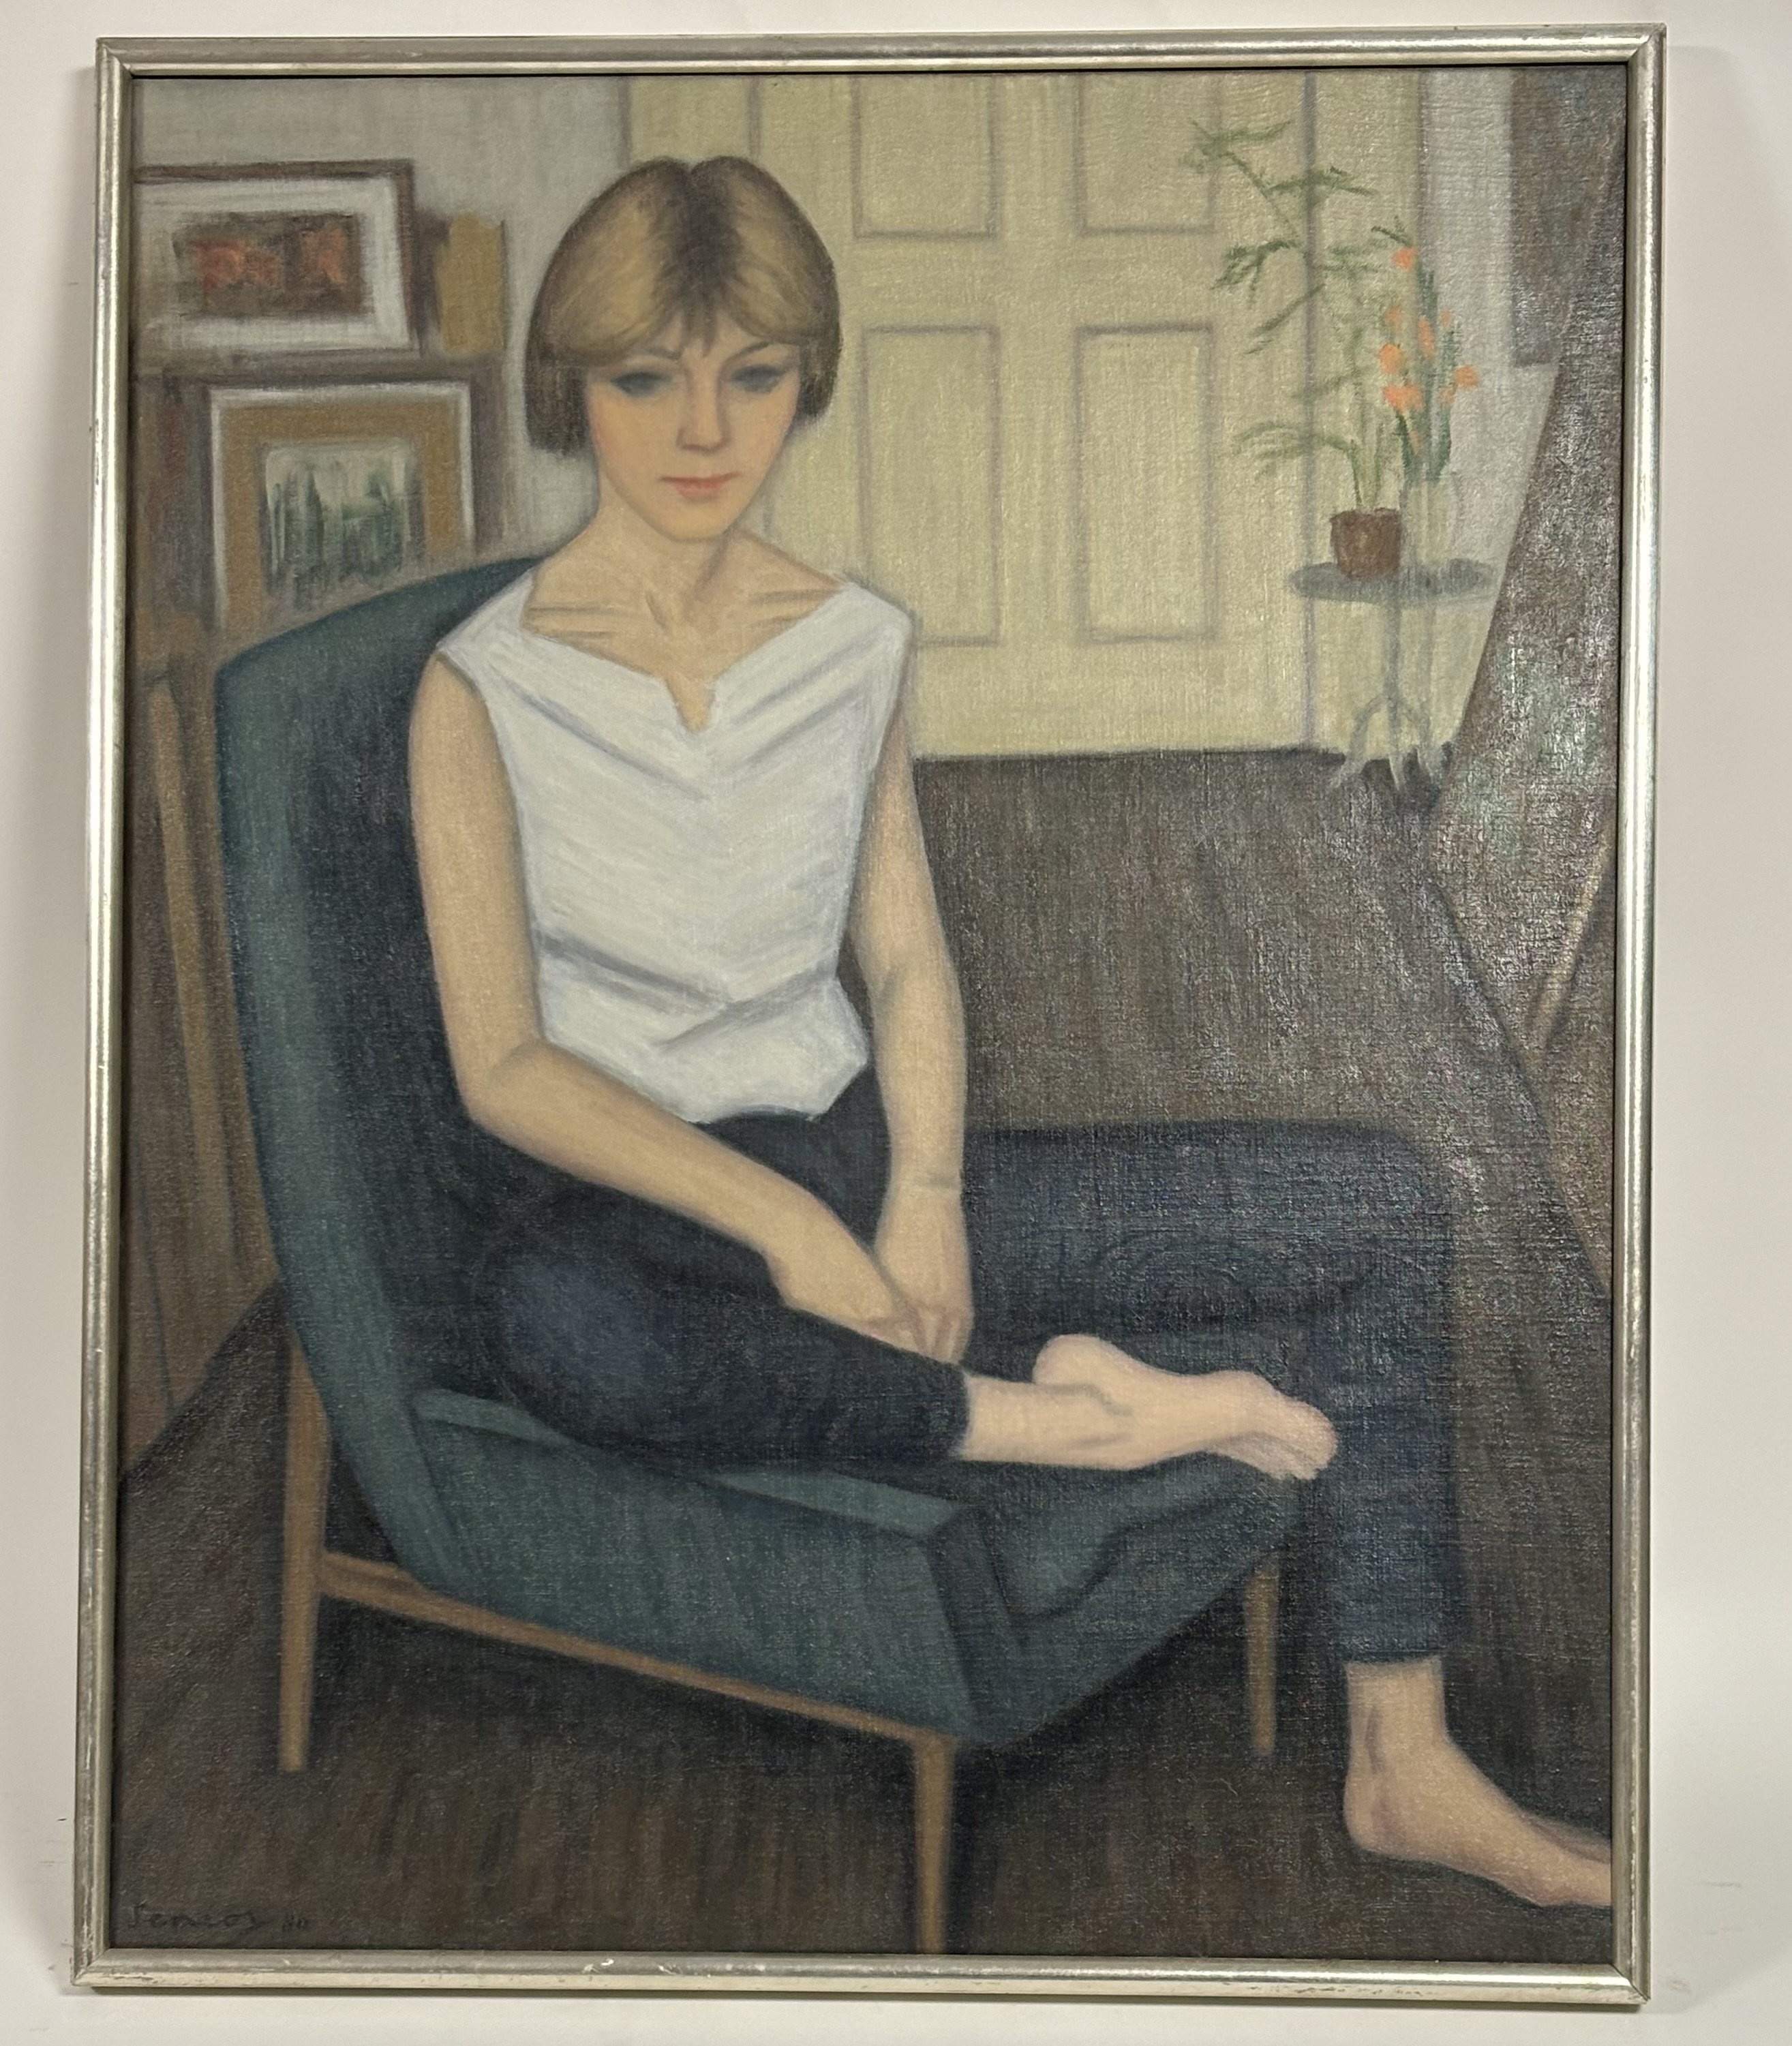 Property of the Late Countess Haig, Bryan Senior (1935-), Portrait of Vivienne Haig sitting in her